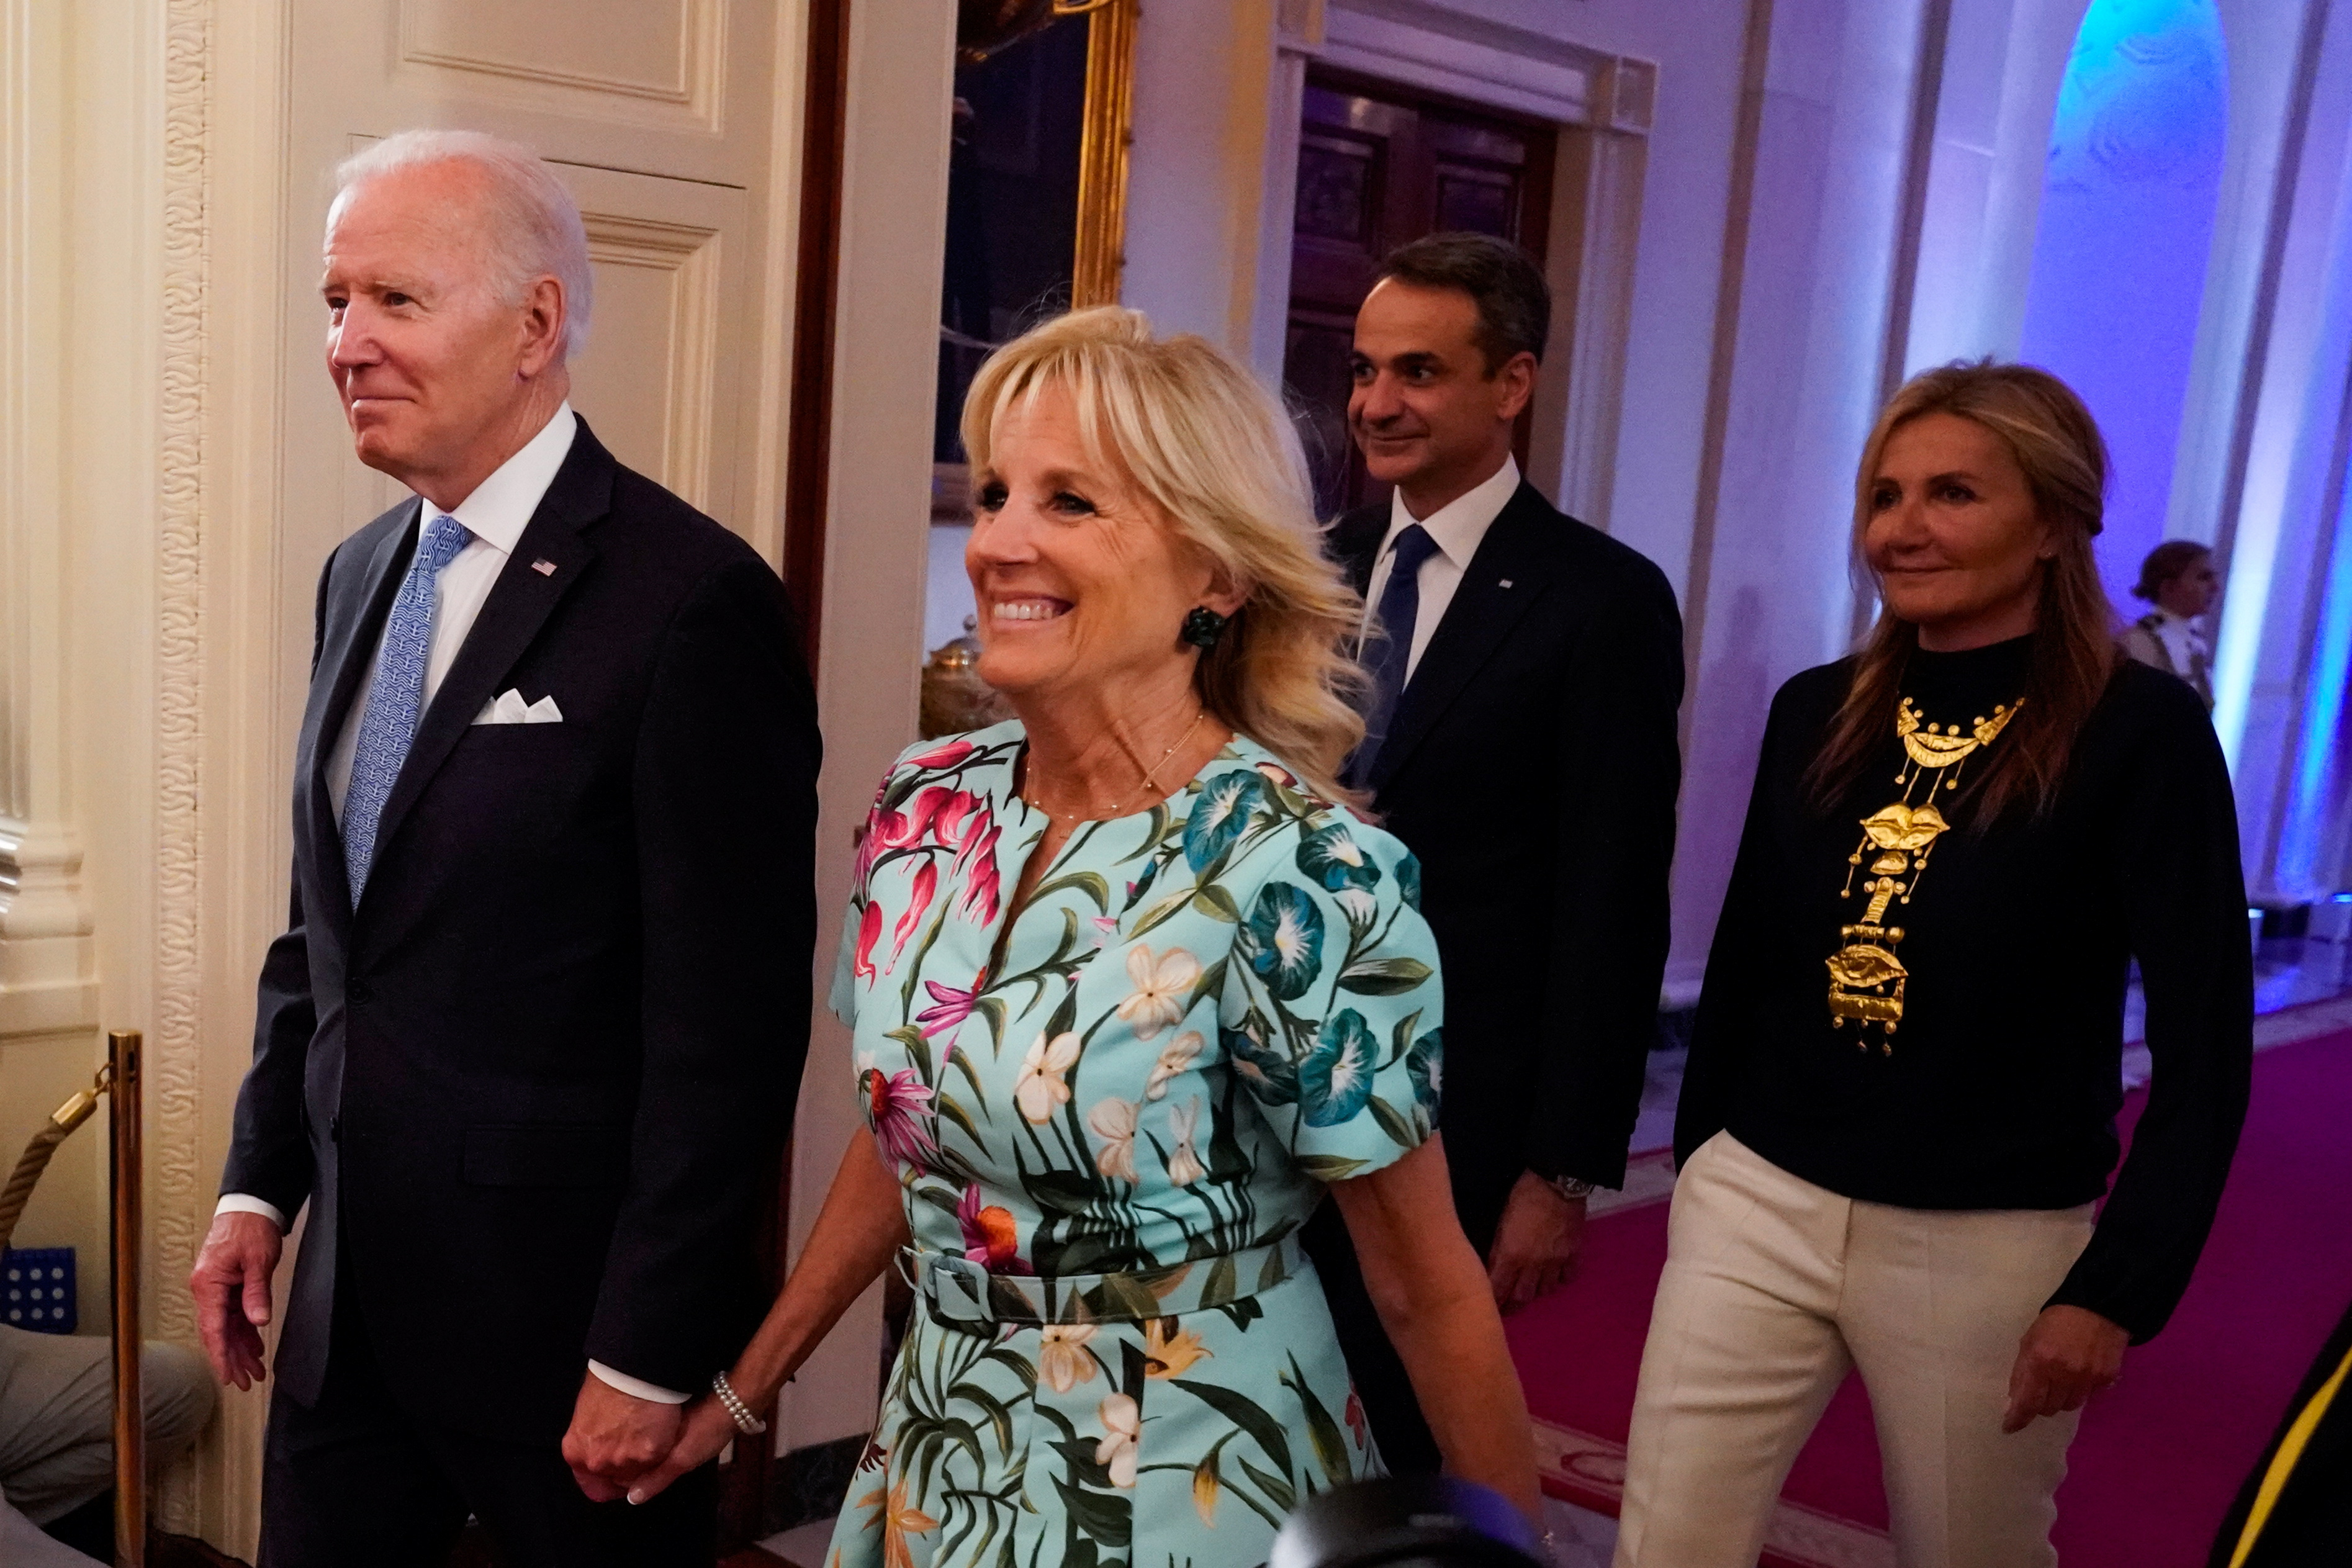 U.S. President Joe Biden and first lady Jill Biden host Prime Minister Kyriakos Mitsotakis of Greece and his wife during a reception at the White House in Washington